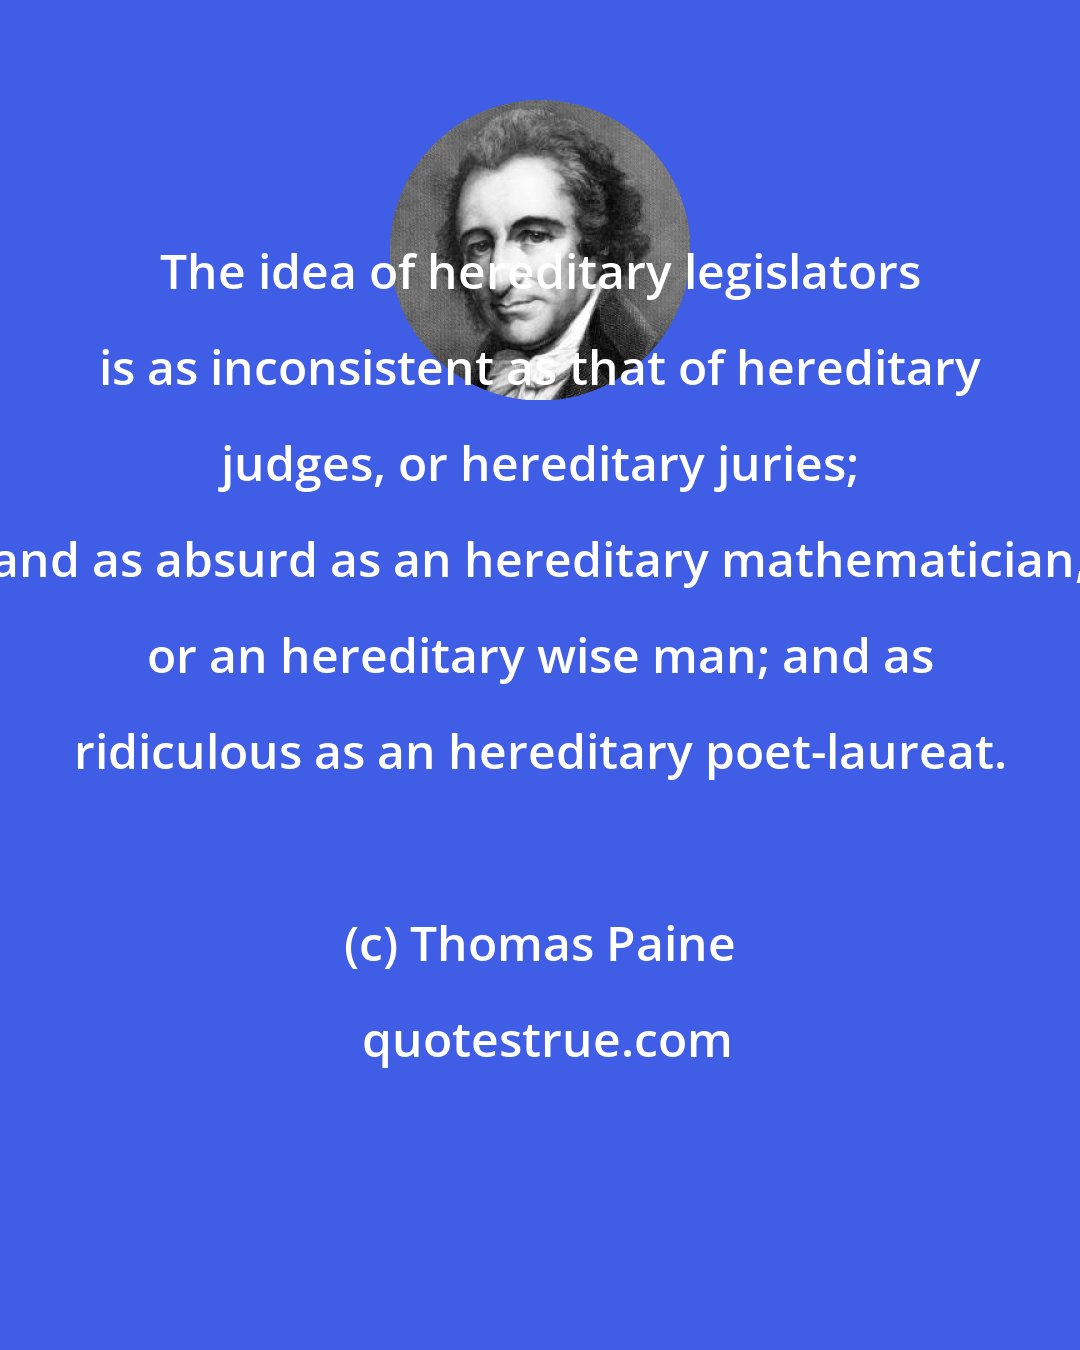 Thomas Paine: The idea of hereditary legislators is as inconsistent as that of hereditary judges, or hereditary juries; and as absurd as an hereditary mathematician, or an hereditary wise man; and as ridiculous as an hereditary poet-laureat.